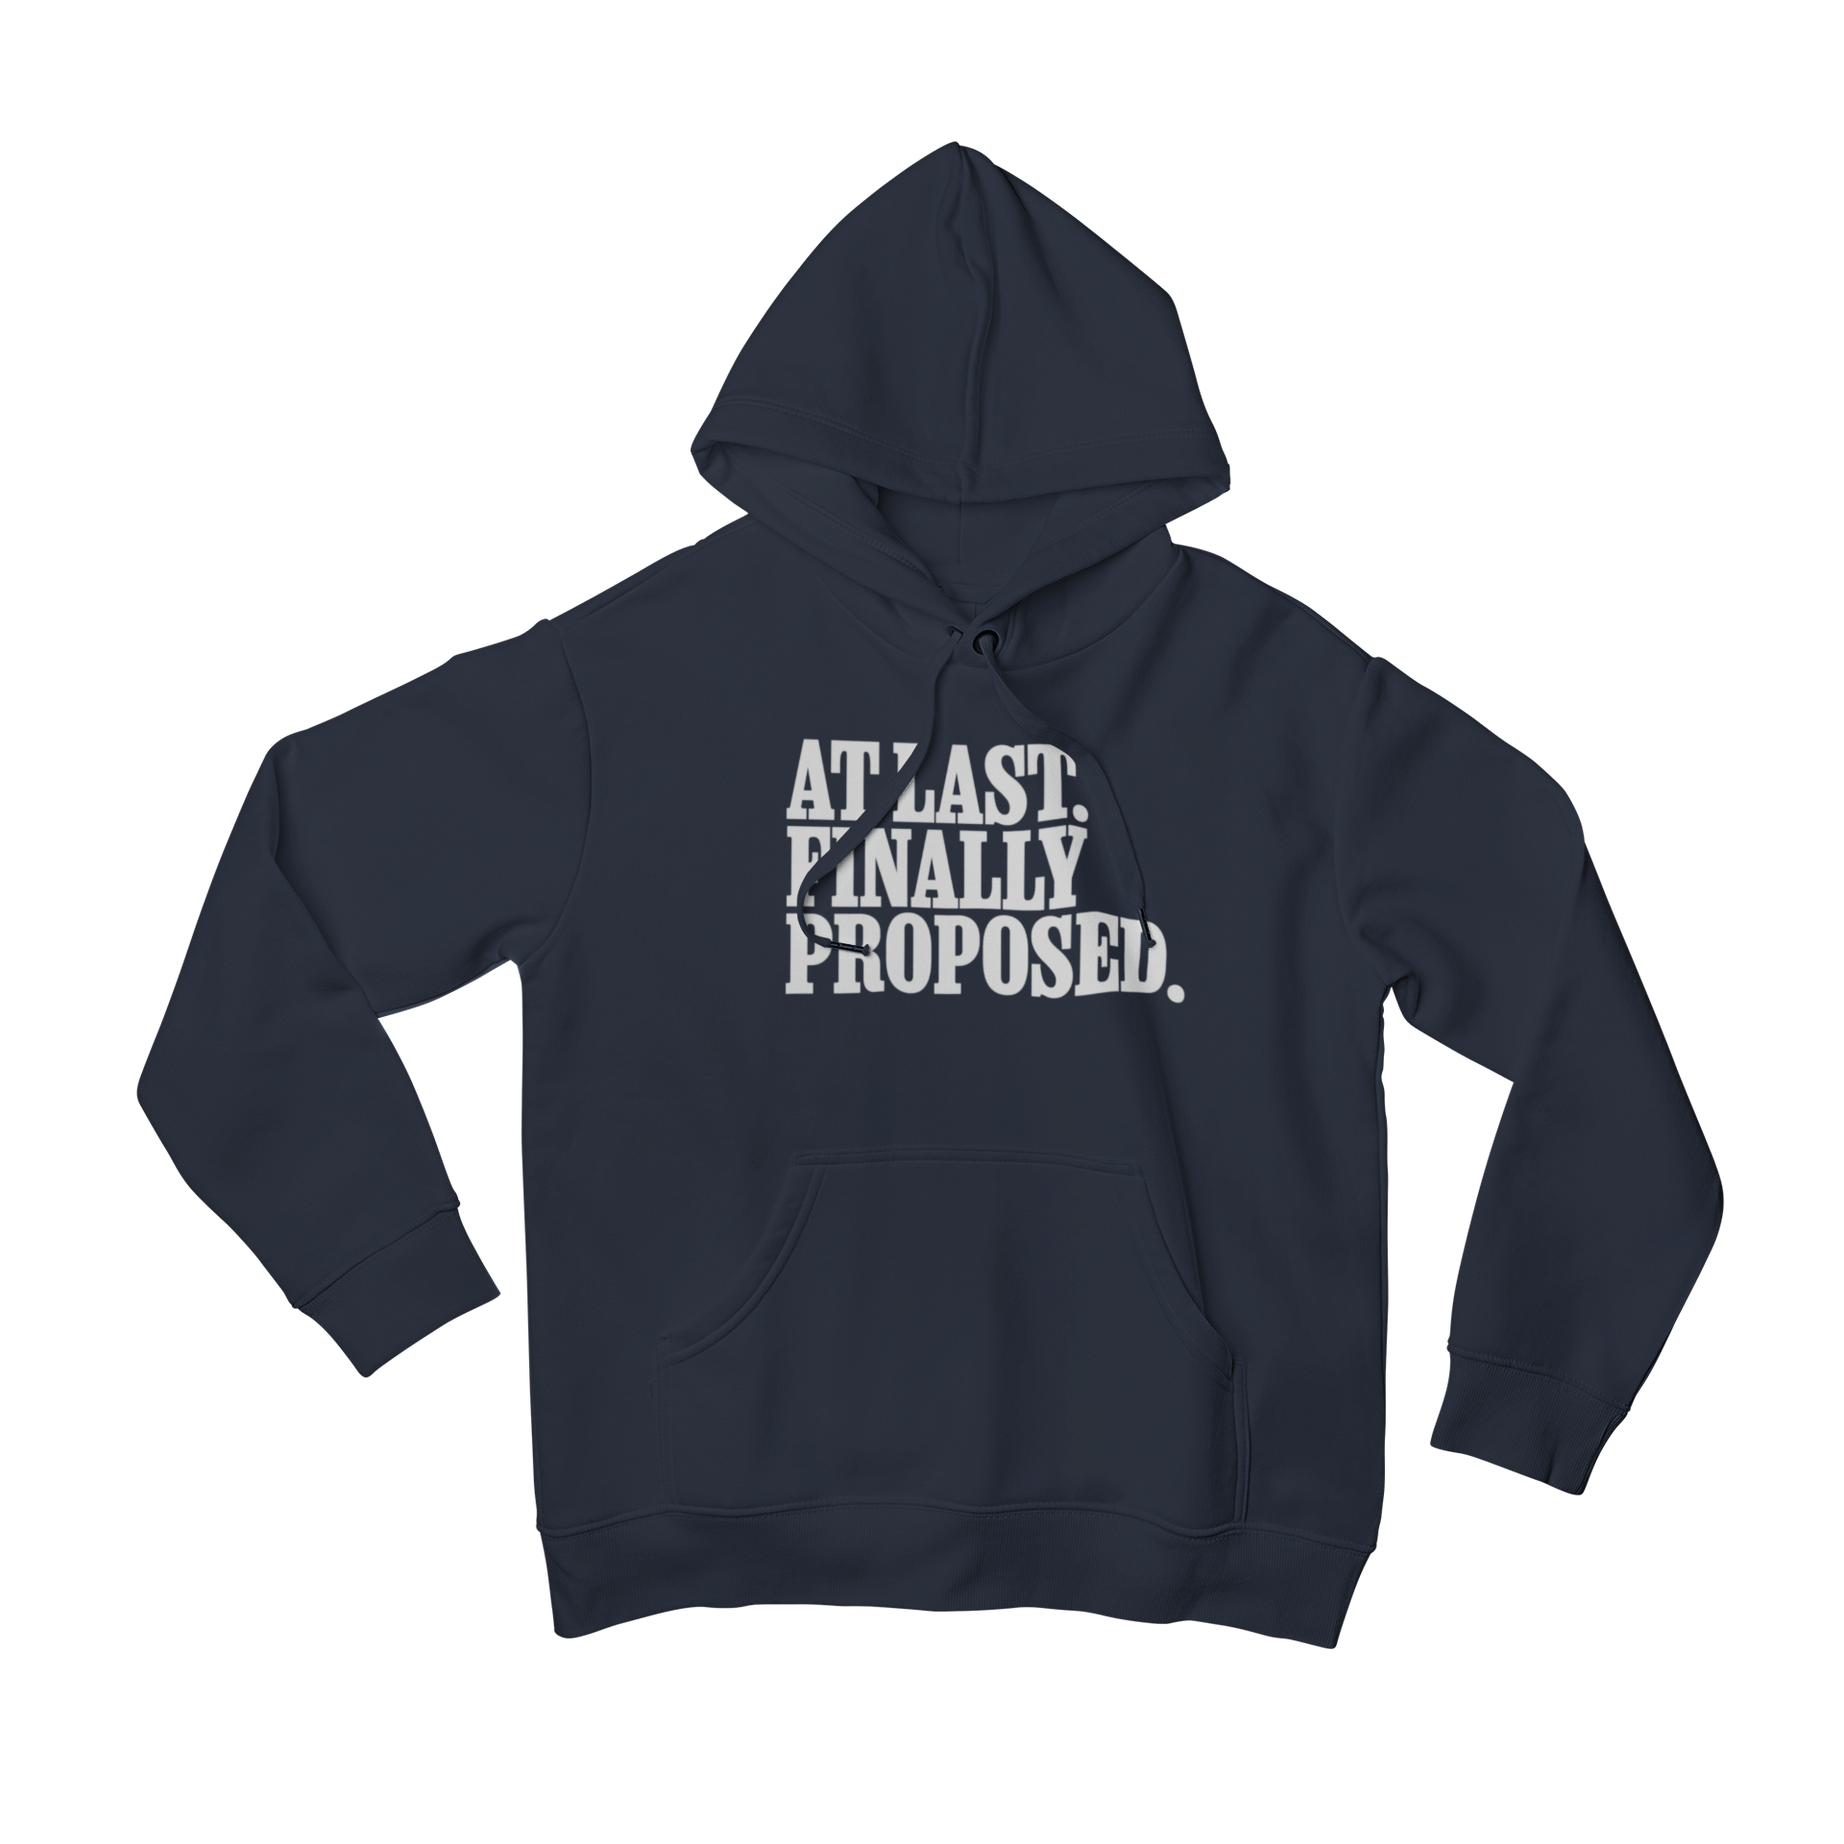 Meet "At Last Proposed" hoodie, the perfect addition to your engagement wardrobe. With a matching counterpart and a stylish slogan, this hoodie is the ultimate way to announce your engagement. Get ready to say "I do" in style!